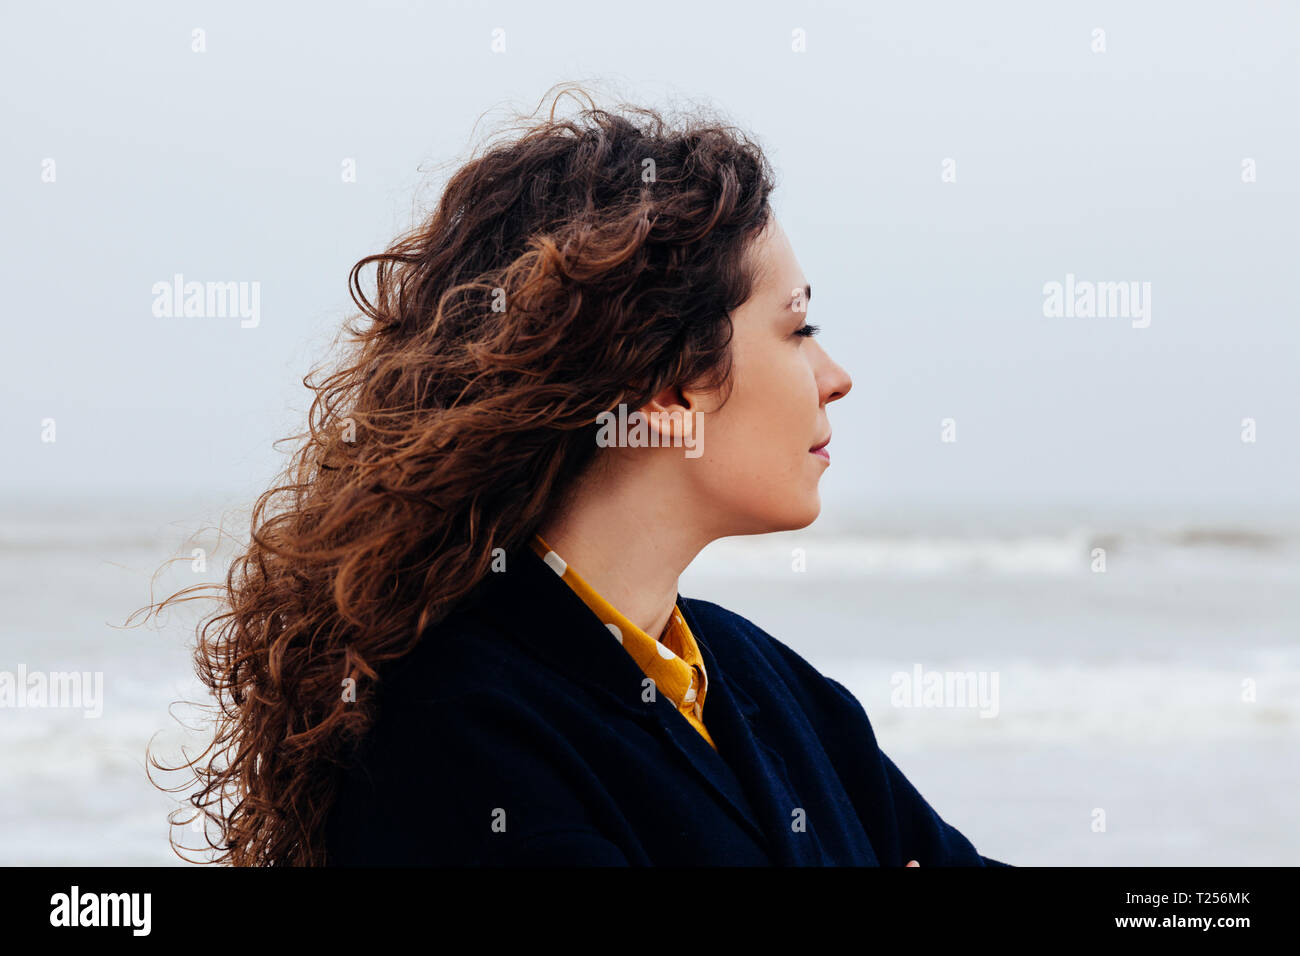 Close-up of a girl with long curly hair against a cold winter sea ...